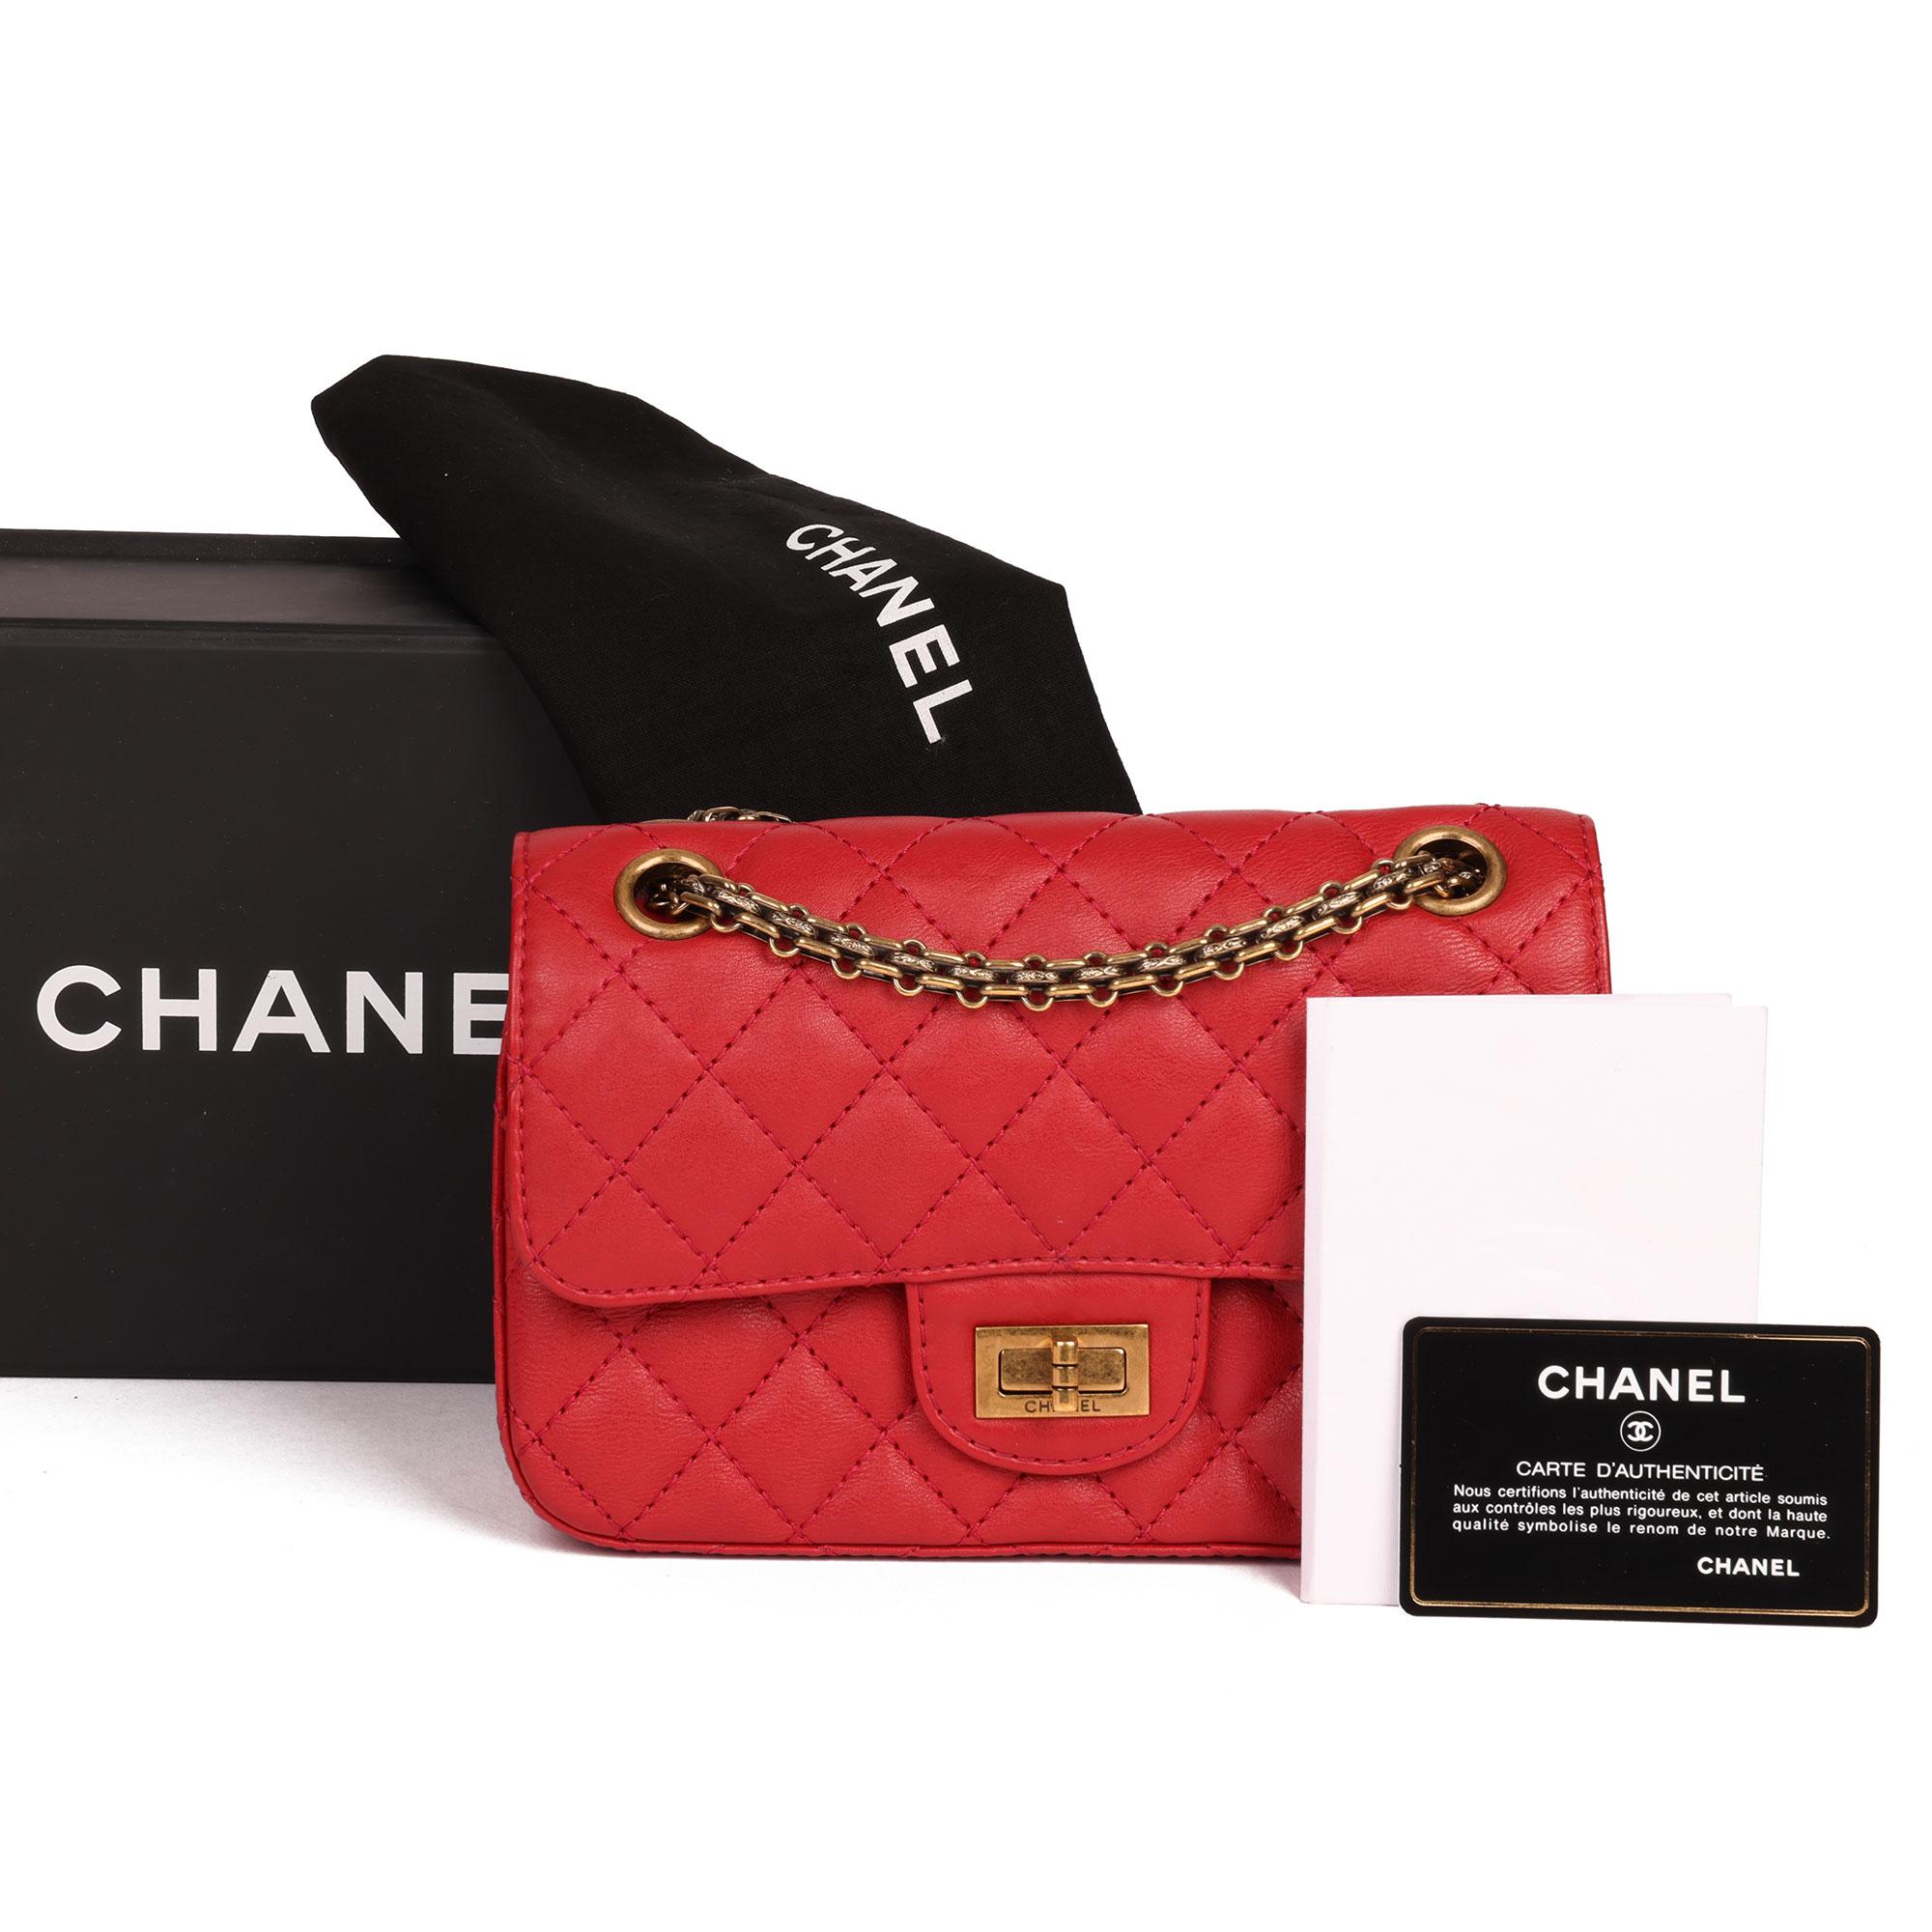 Chanel Red Quilted Calfskin Leather 2.55 Reissue 224 Double Flap Bag 6